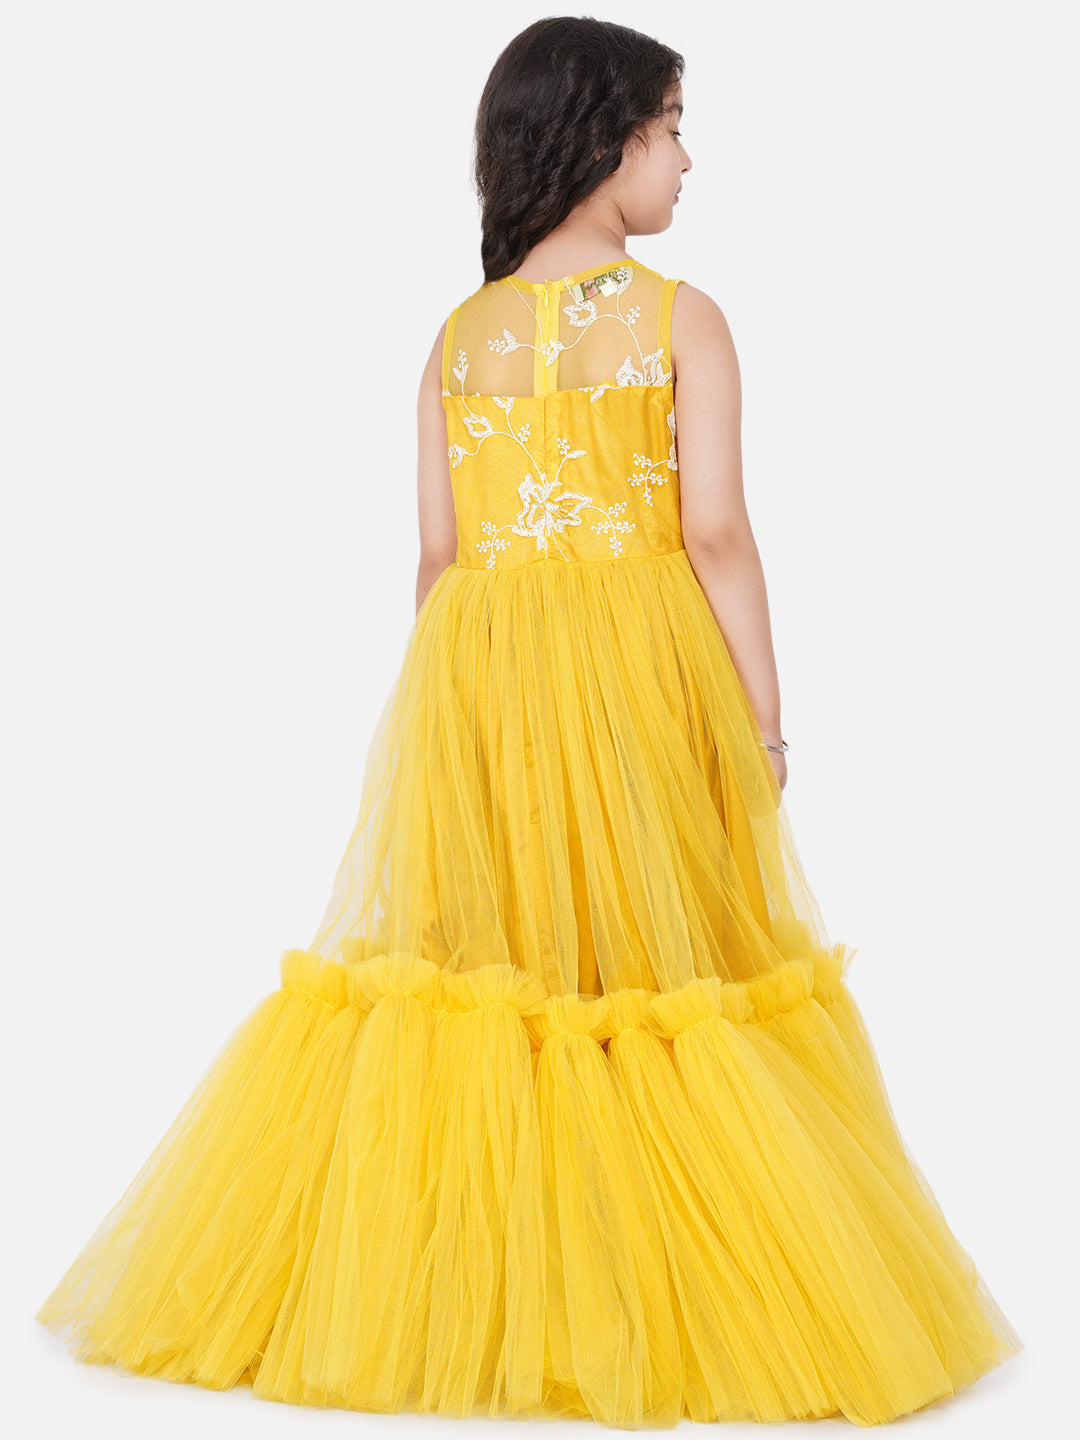 Yellow Sweetheart Ball Gown Yellow Dress For Quinceanera With Lace Applique  And Big Bow Knot 2021 Elegant Formal Prom Gresses From Verycute, $76.61 |  DHgate.Com